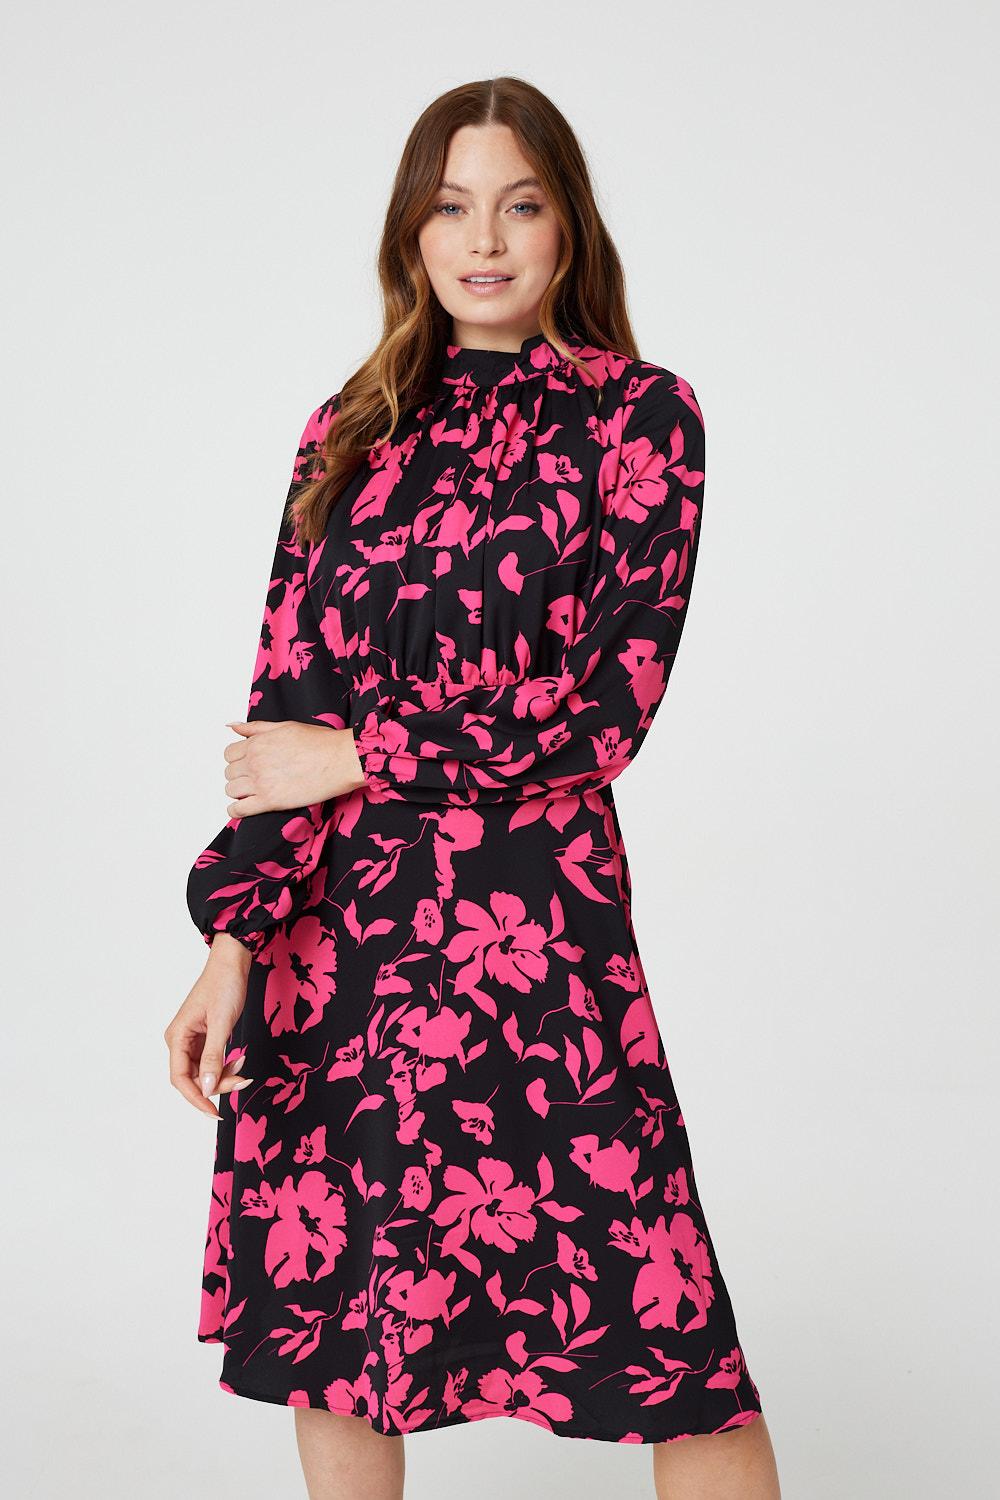 Pink | Floral Ruched Front Midi Dress : Model is 5'9"/175 cm and wears UK8/EU36/US4/AUS8